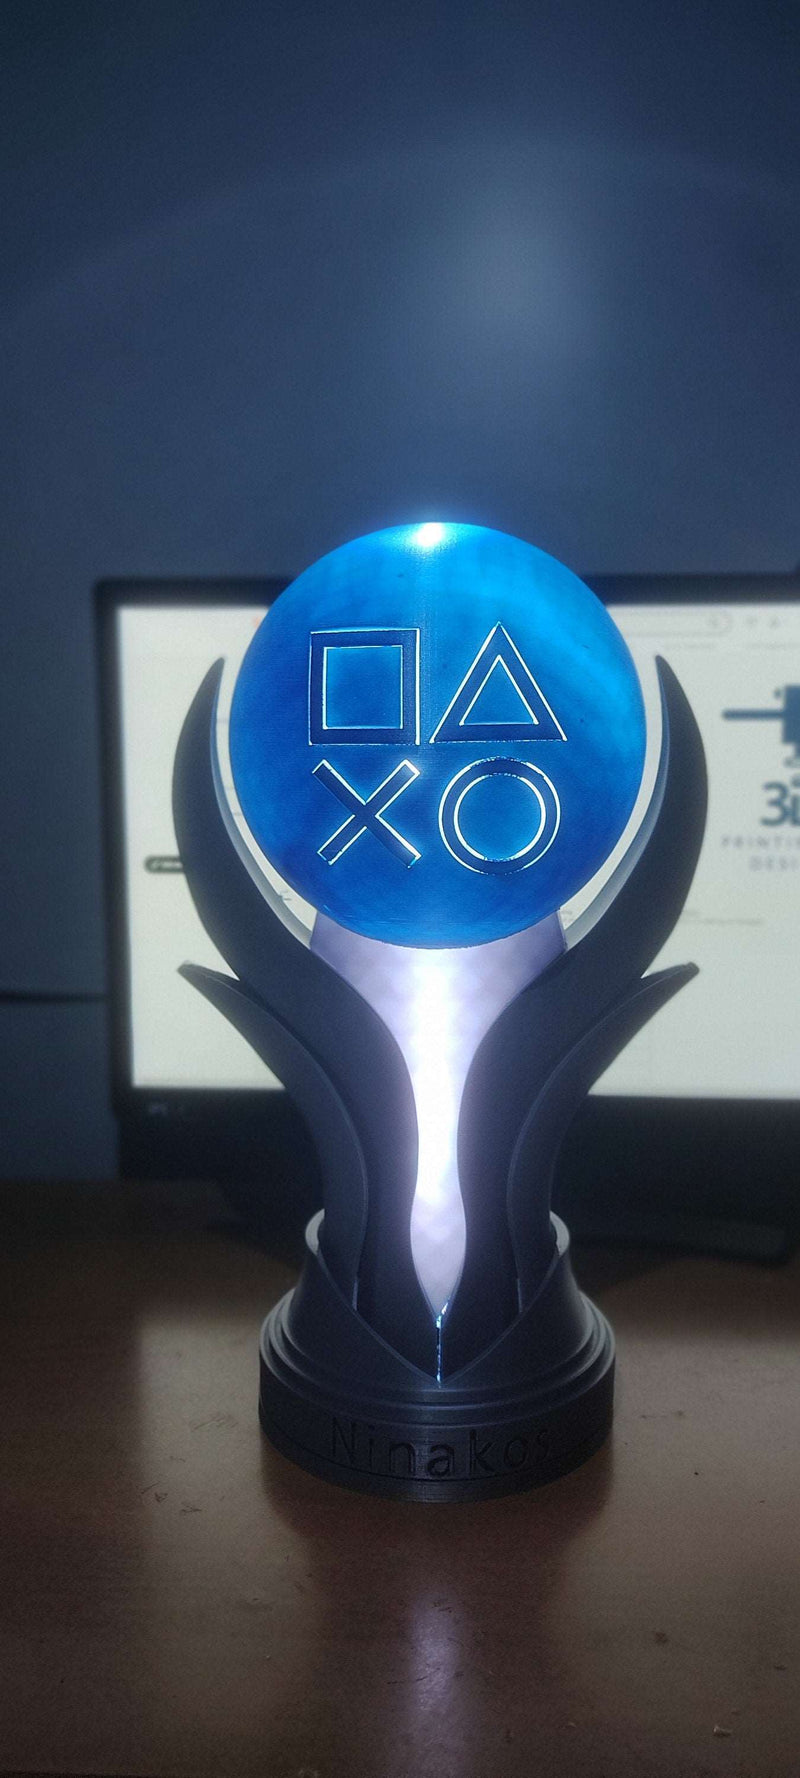 PS5 3D Beast Size High Quality Platinum RGB Led Lights Made Trophy in Special Limited Edition 36cm / 14,17in almost as tall as Playstation 5